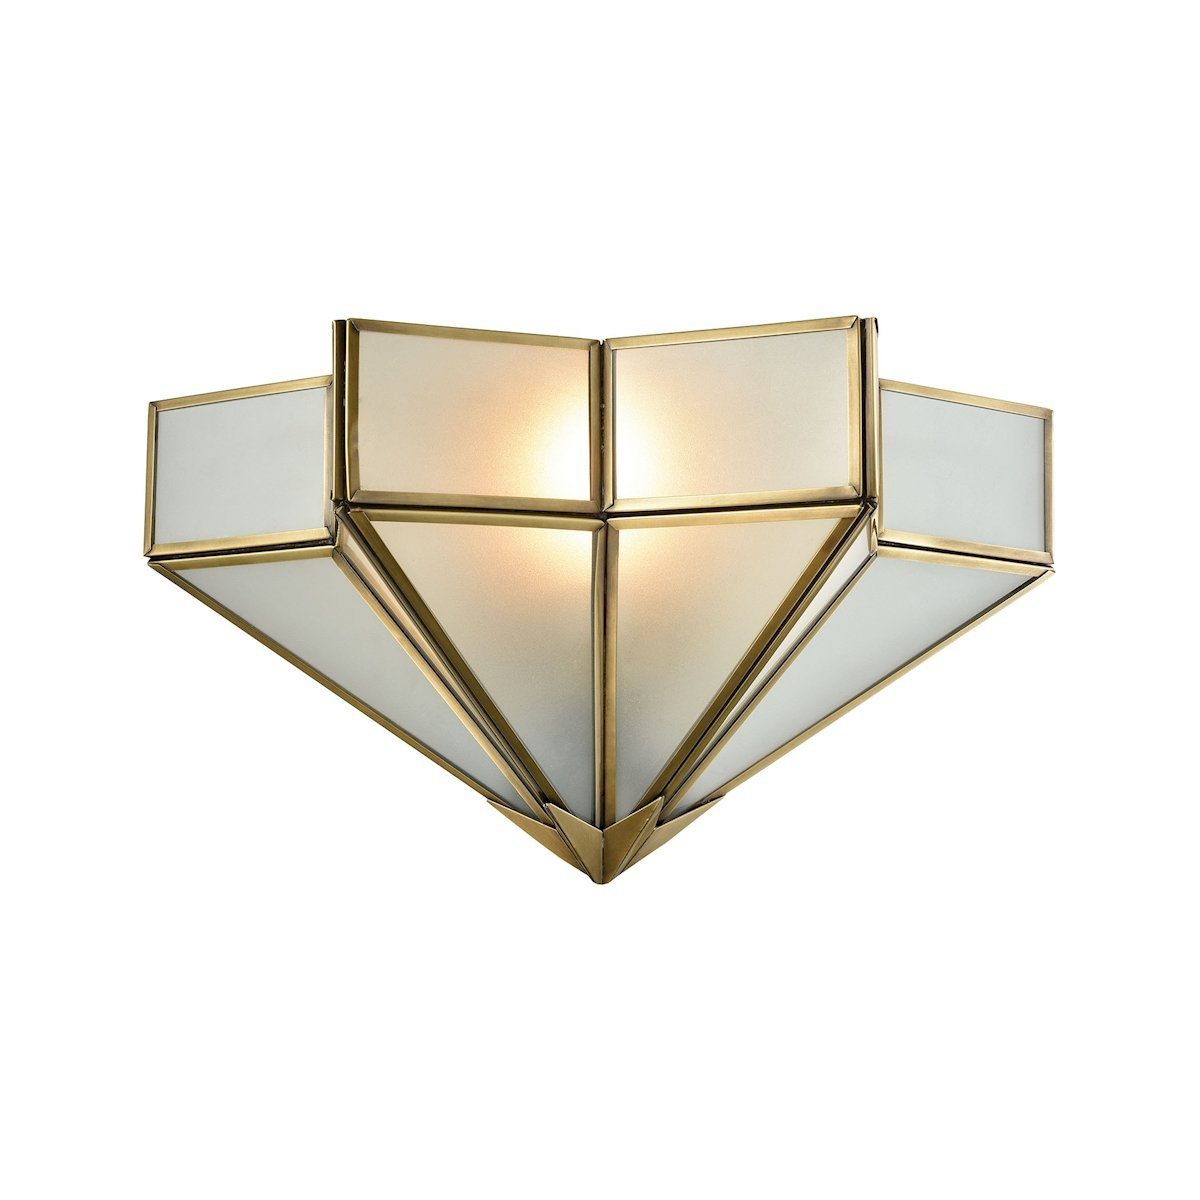 Decostar 1 Light Wall Sconce In Brushed Brass With Frosted Glass Wall Sconce Elk Lighting 